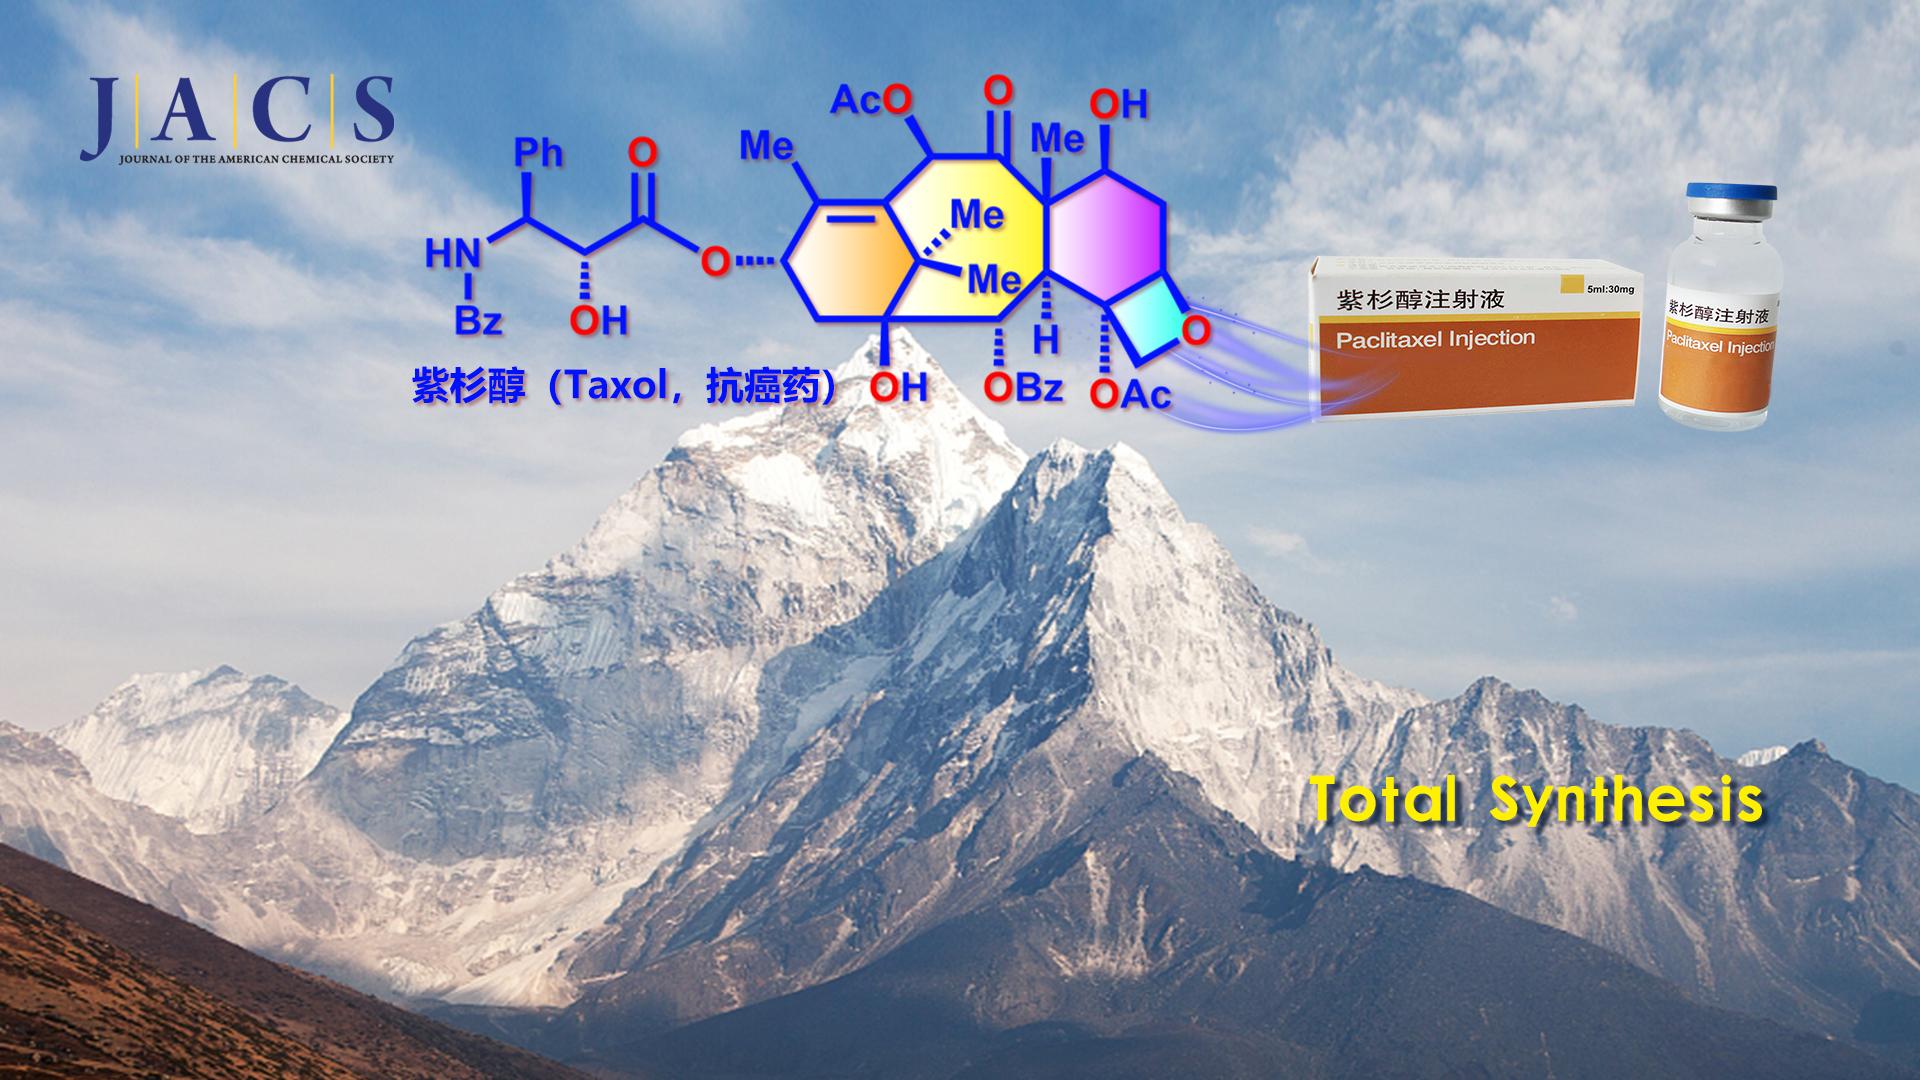 Oct 2021: Congratulations to Ya-Jian,Chen-Chen,Min-Long for their J. Am. Chem. Soc. paper published(图1)